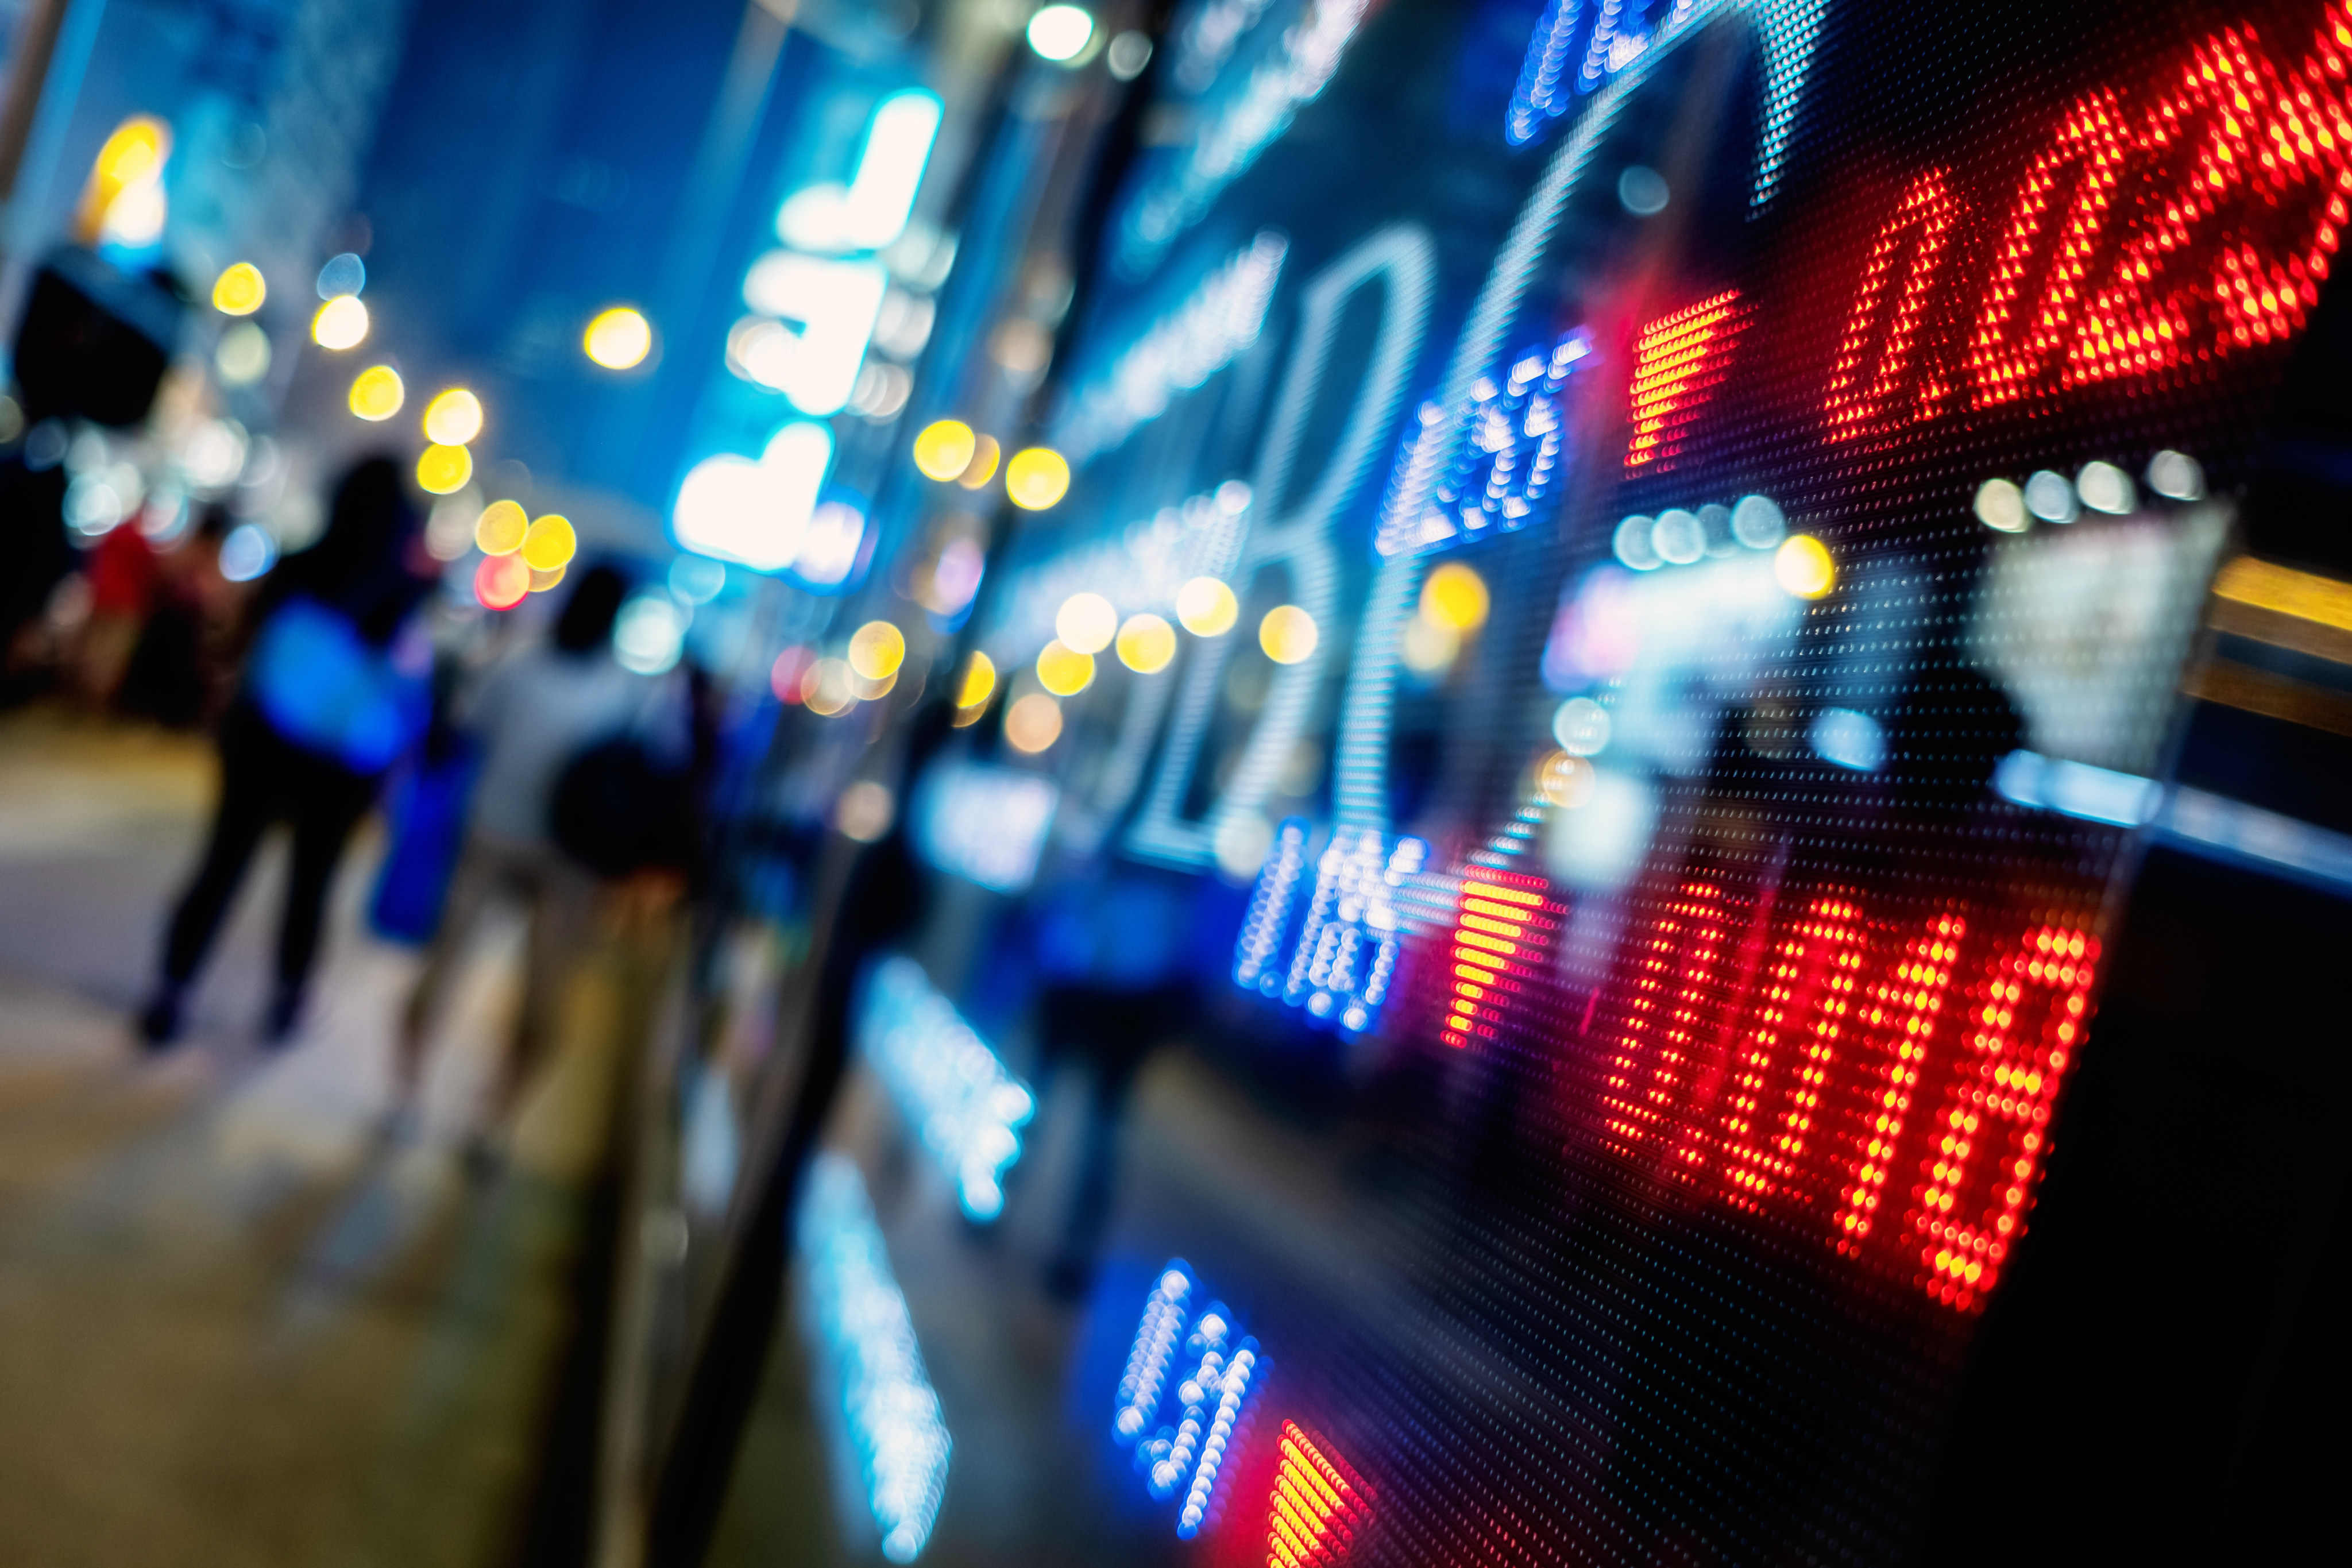 Investors are banking on more stimulus from Beijing in the coming months to lift stock prices. Photo: Shutterstock